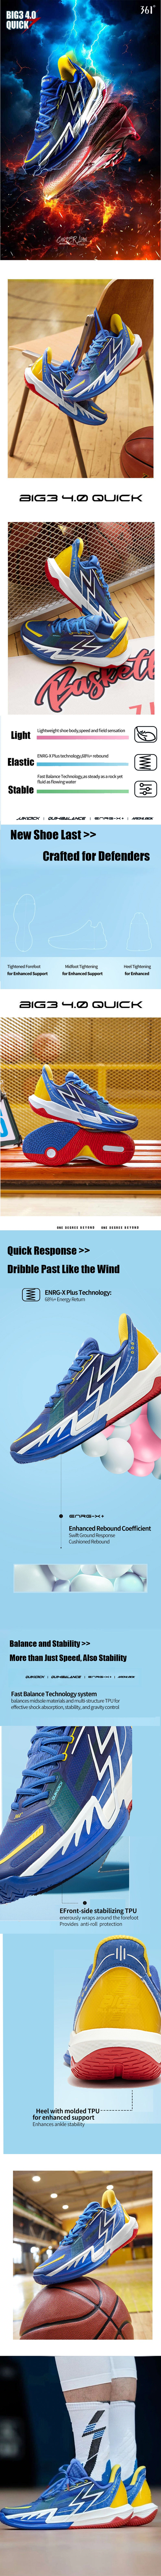 Speed, agility in Yellow/Black. ENRG-X Plus tech ensures 68%+ rebound. Crafted for defenders, tightened forefoot, midfoot, and heel for support/lockdown. Quick response for dribbling. Fast Balance tech for stability. TPU for anti-roll. Molded TPU enhances ankle stability. Transparent texture for cultural highlights.